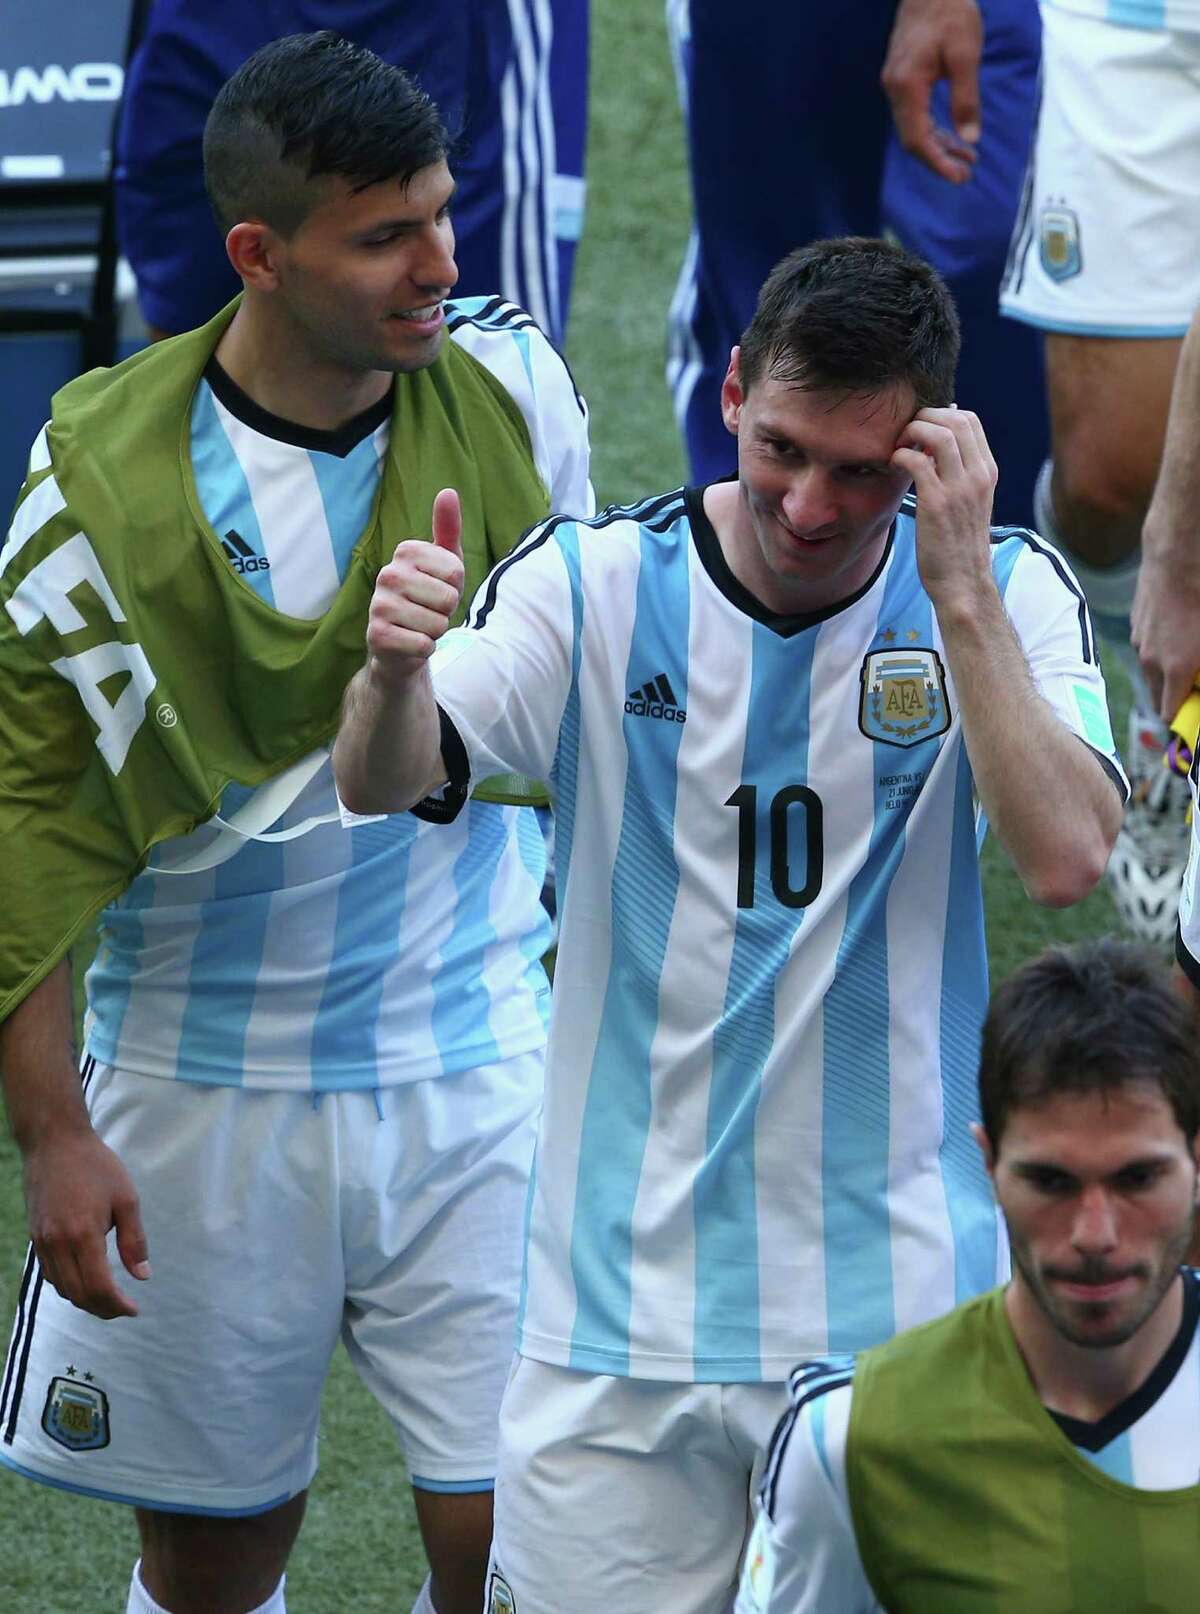 World Cup Messi Gives Argentina 1 0 Win Over Iran